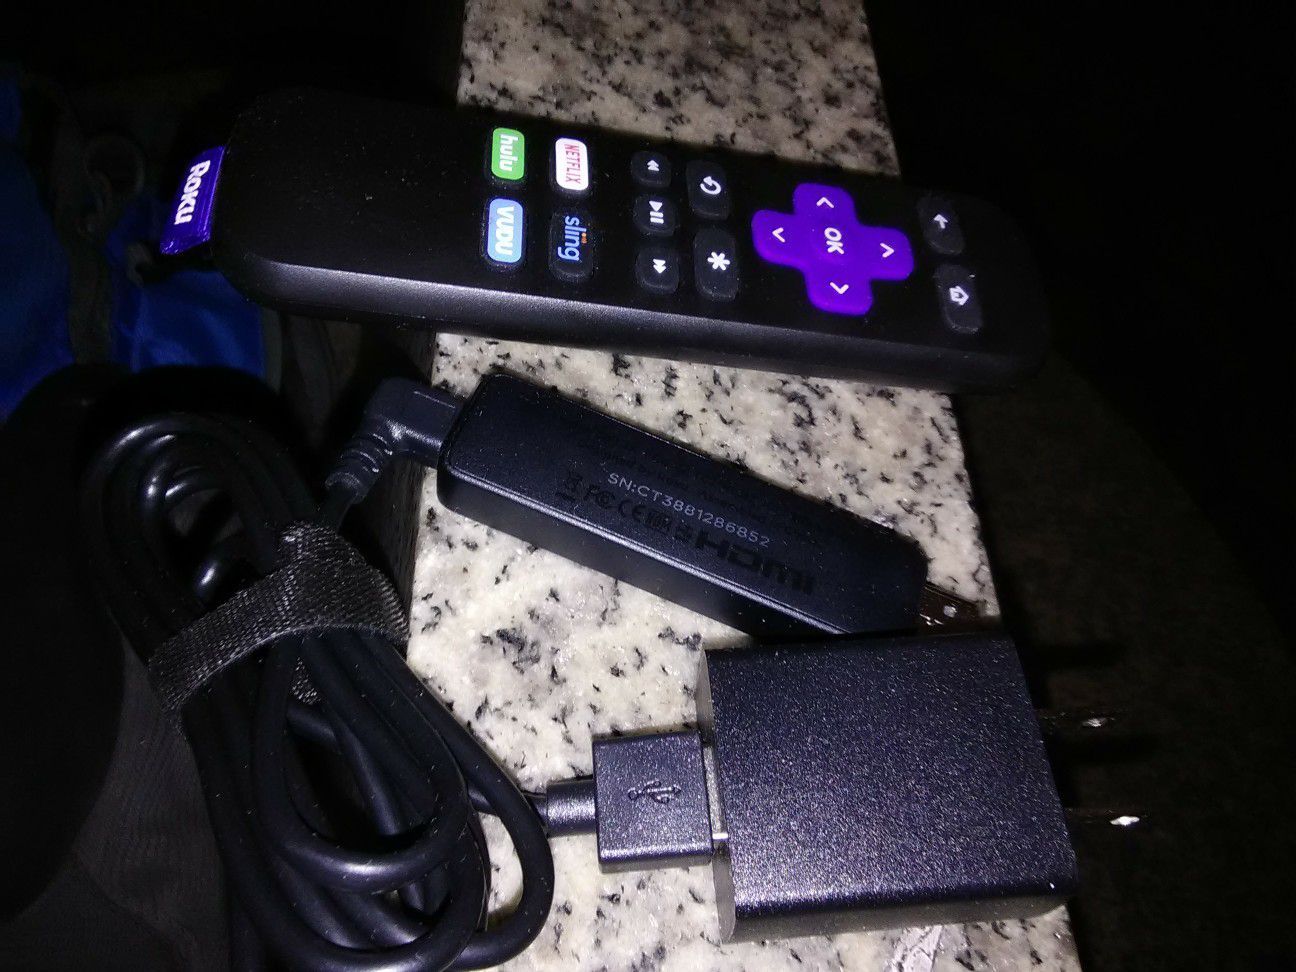 Roku streaming stick with charger cable and remote control